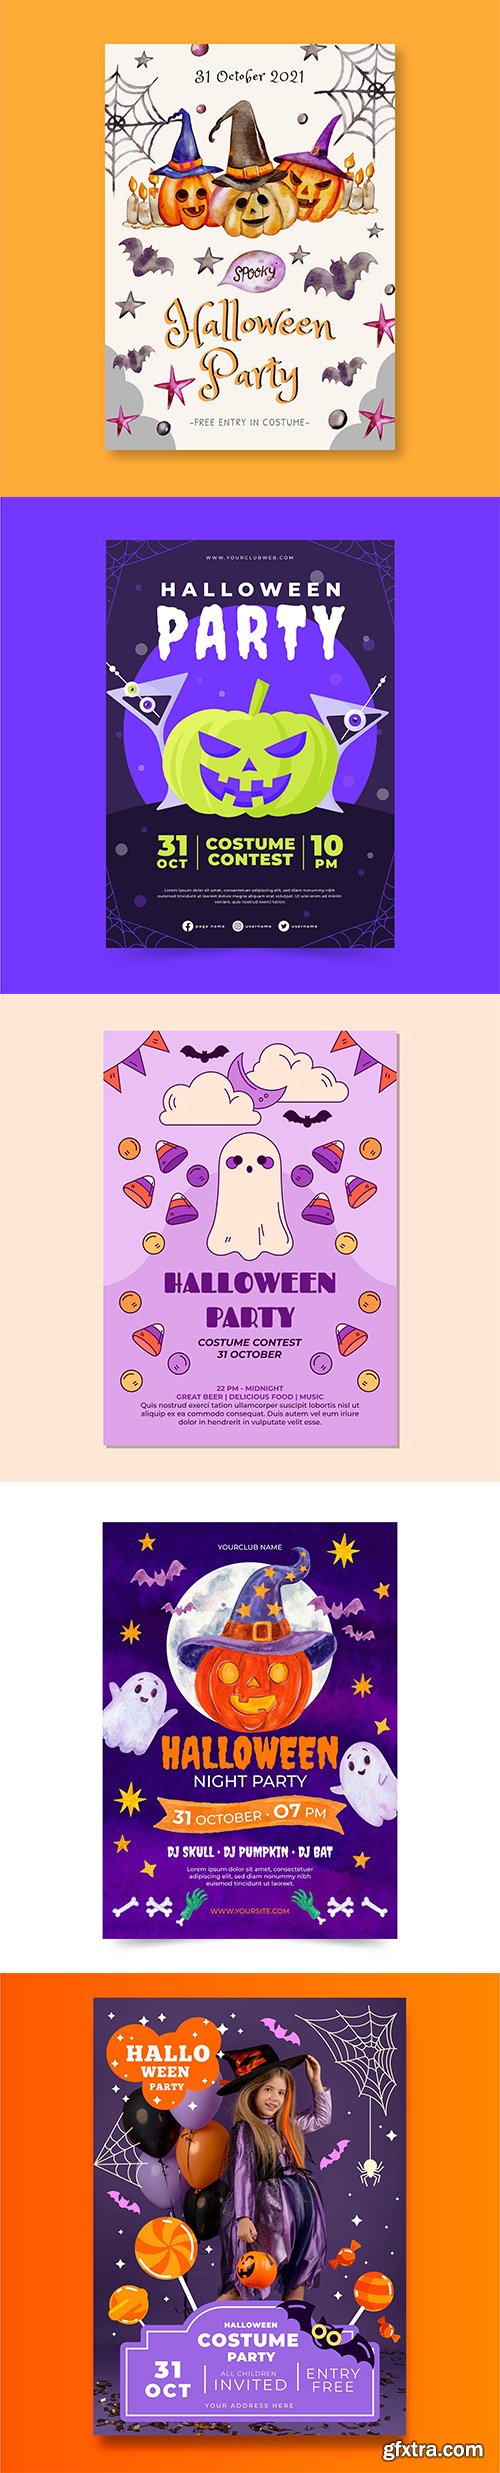 Realistic halloween party vertical flyer template vol 8